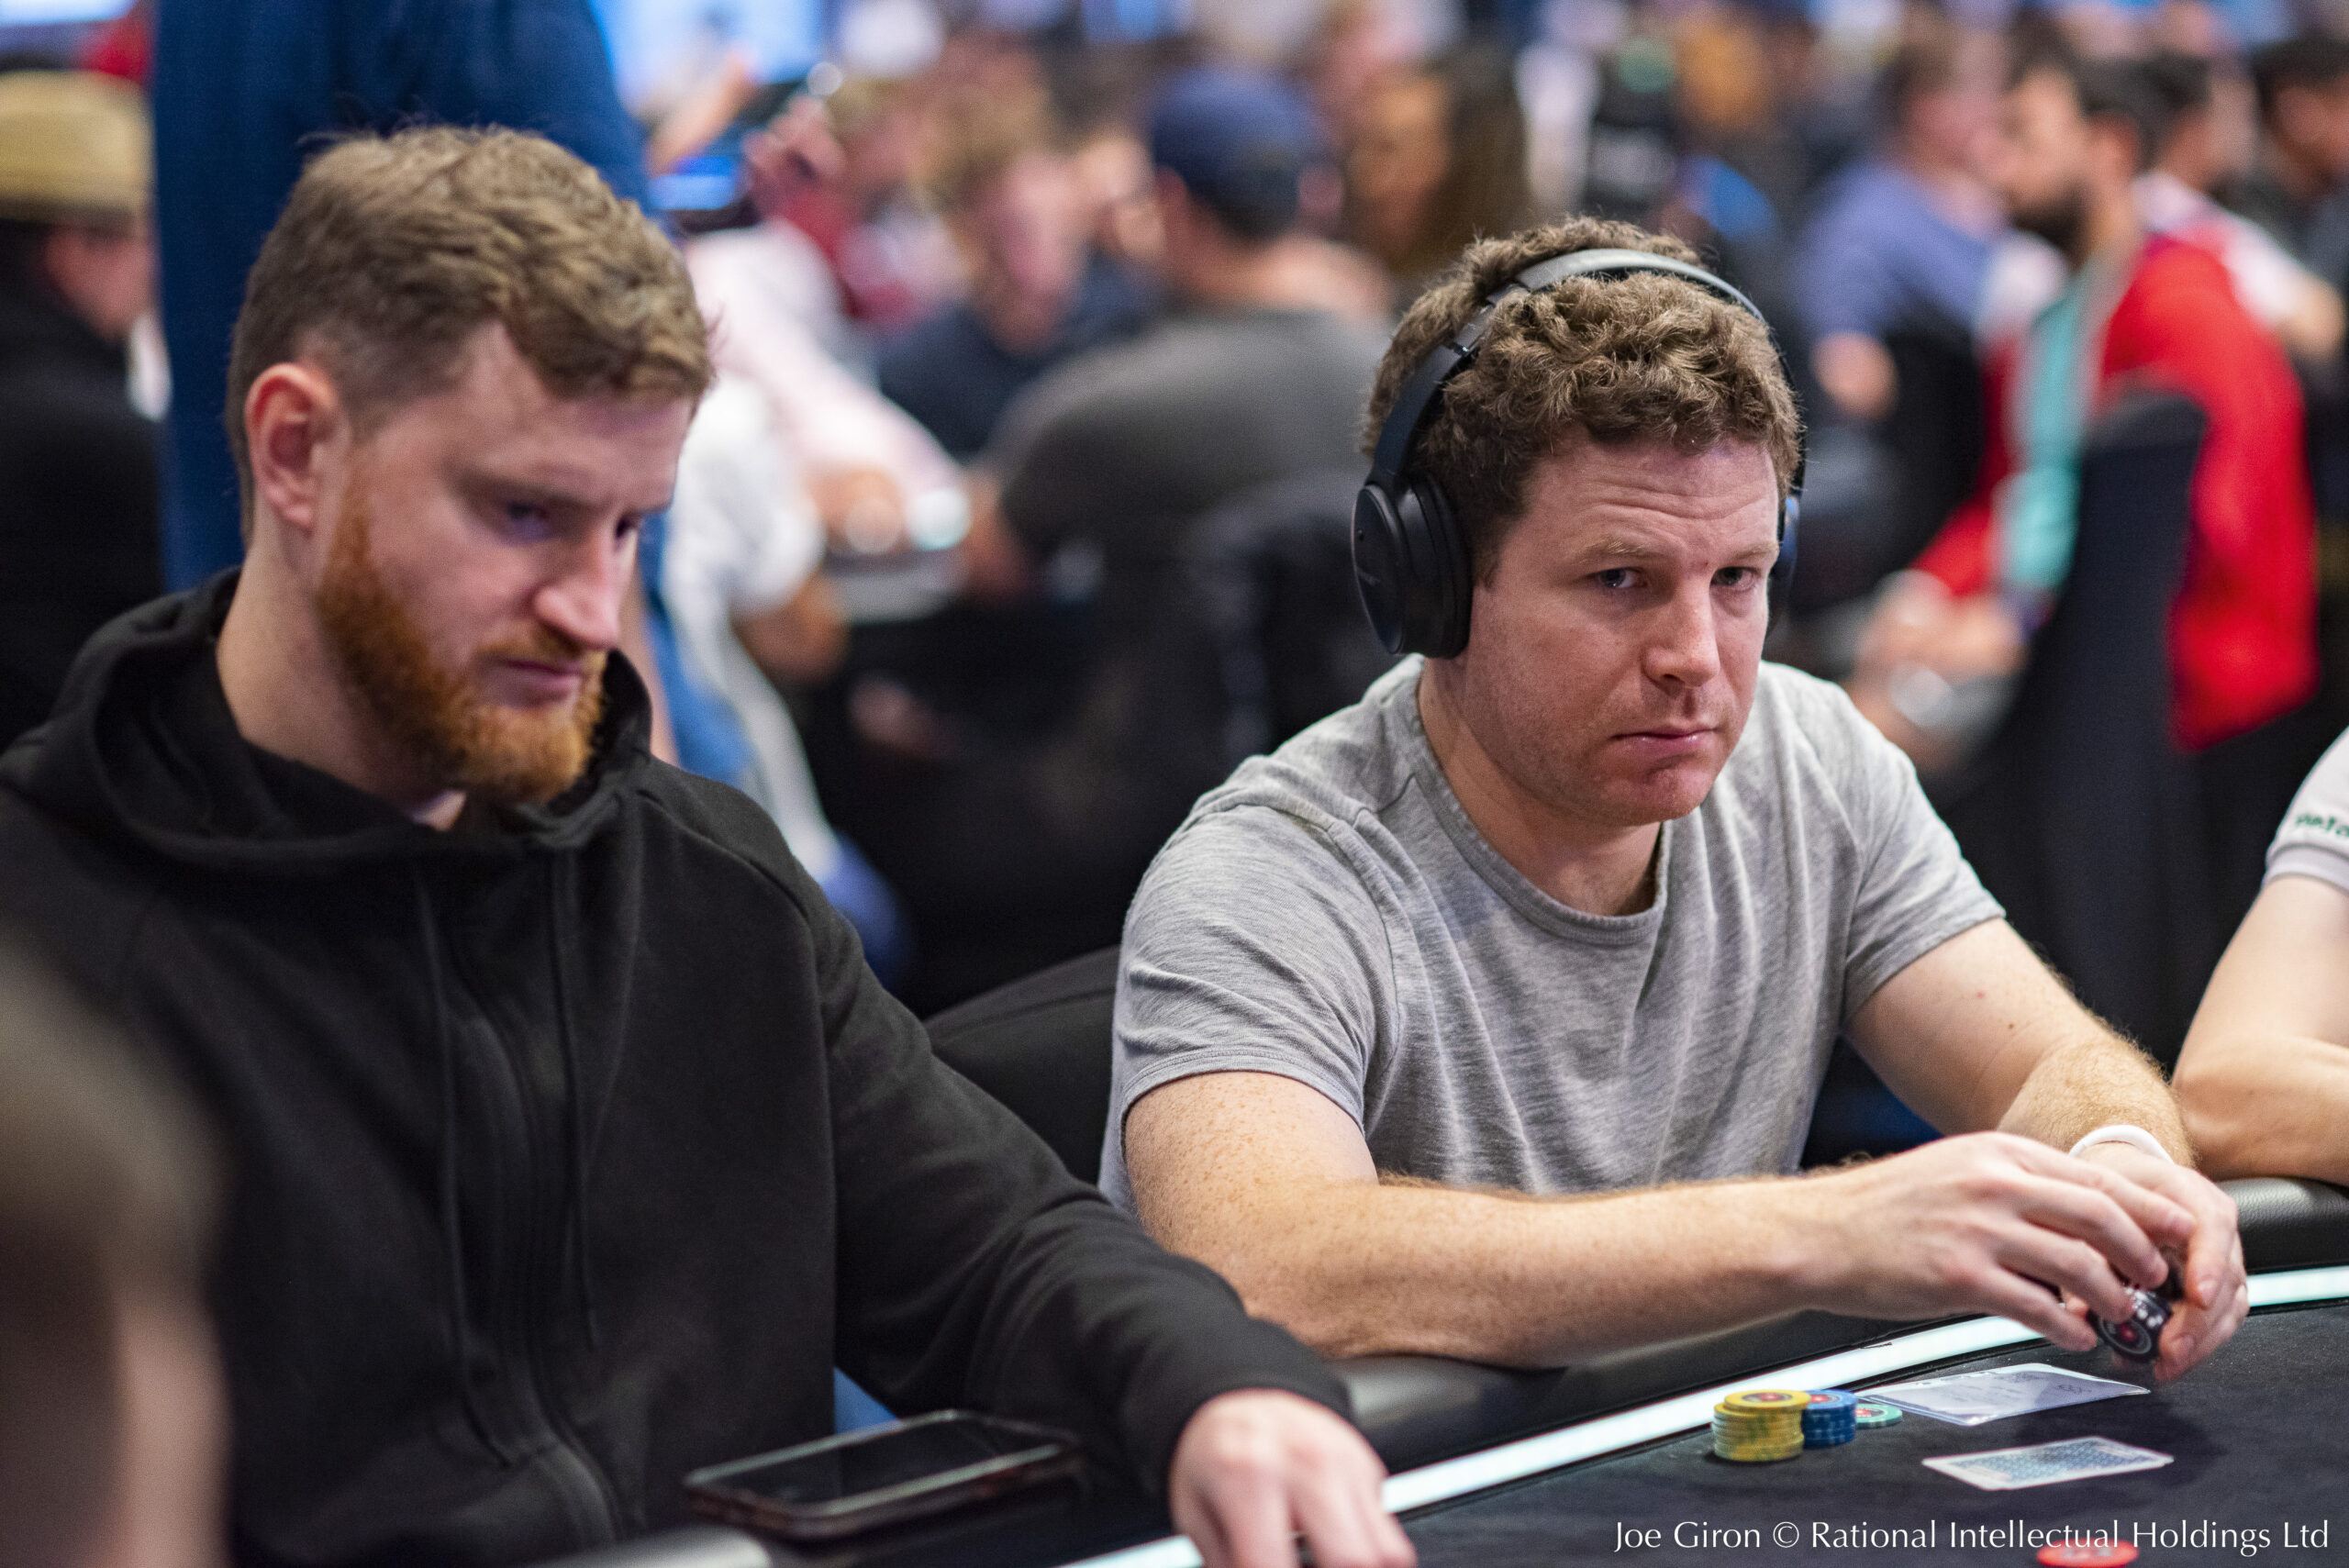 David Peters sits to Will Jaffe's right on Day 1 of the PSPC